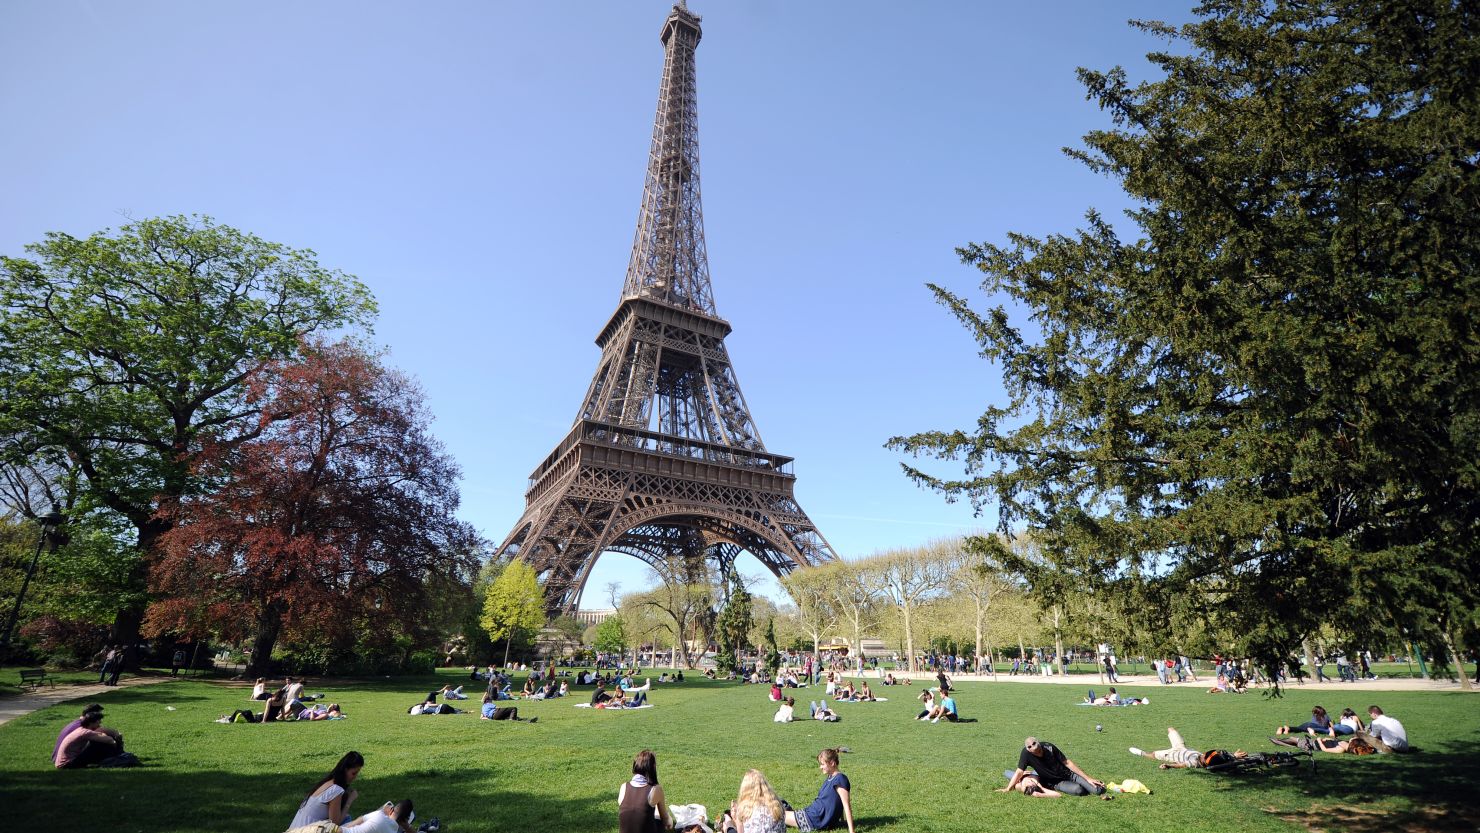 Officials say France's tourism industry needs to work harder to safeguard billions of dollars in revenue.